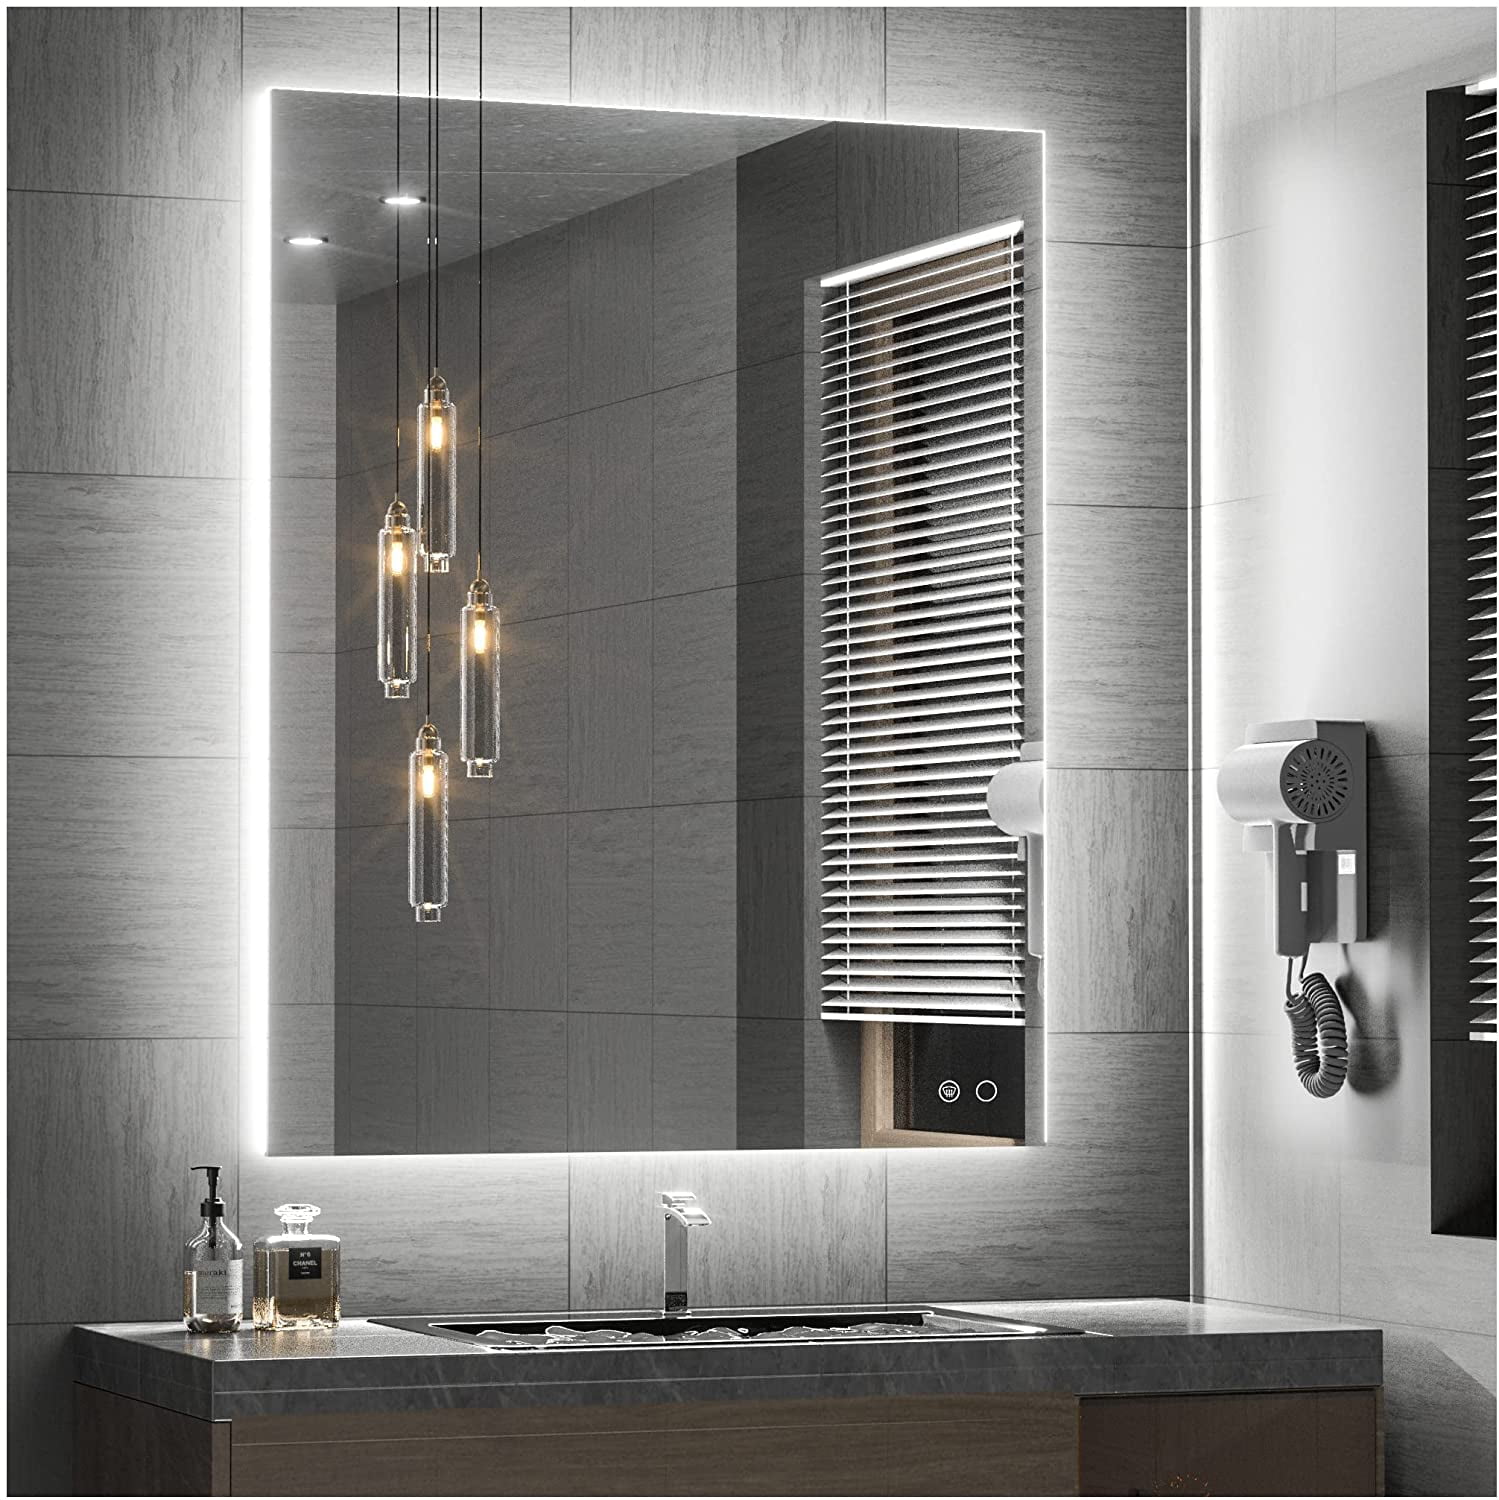 Details about   32"x 24" LED Bathroom Vanity Mirror Wall Mirrors with Illuminated Light Makeup 